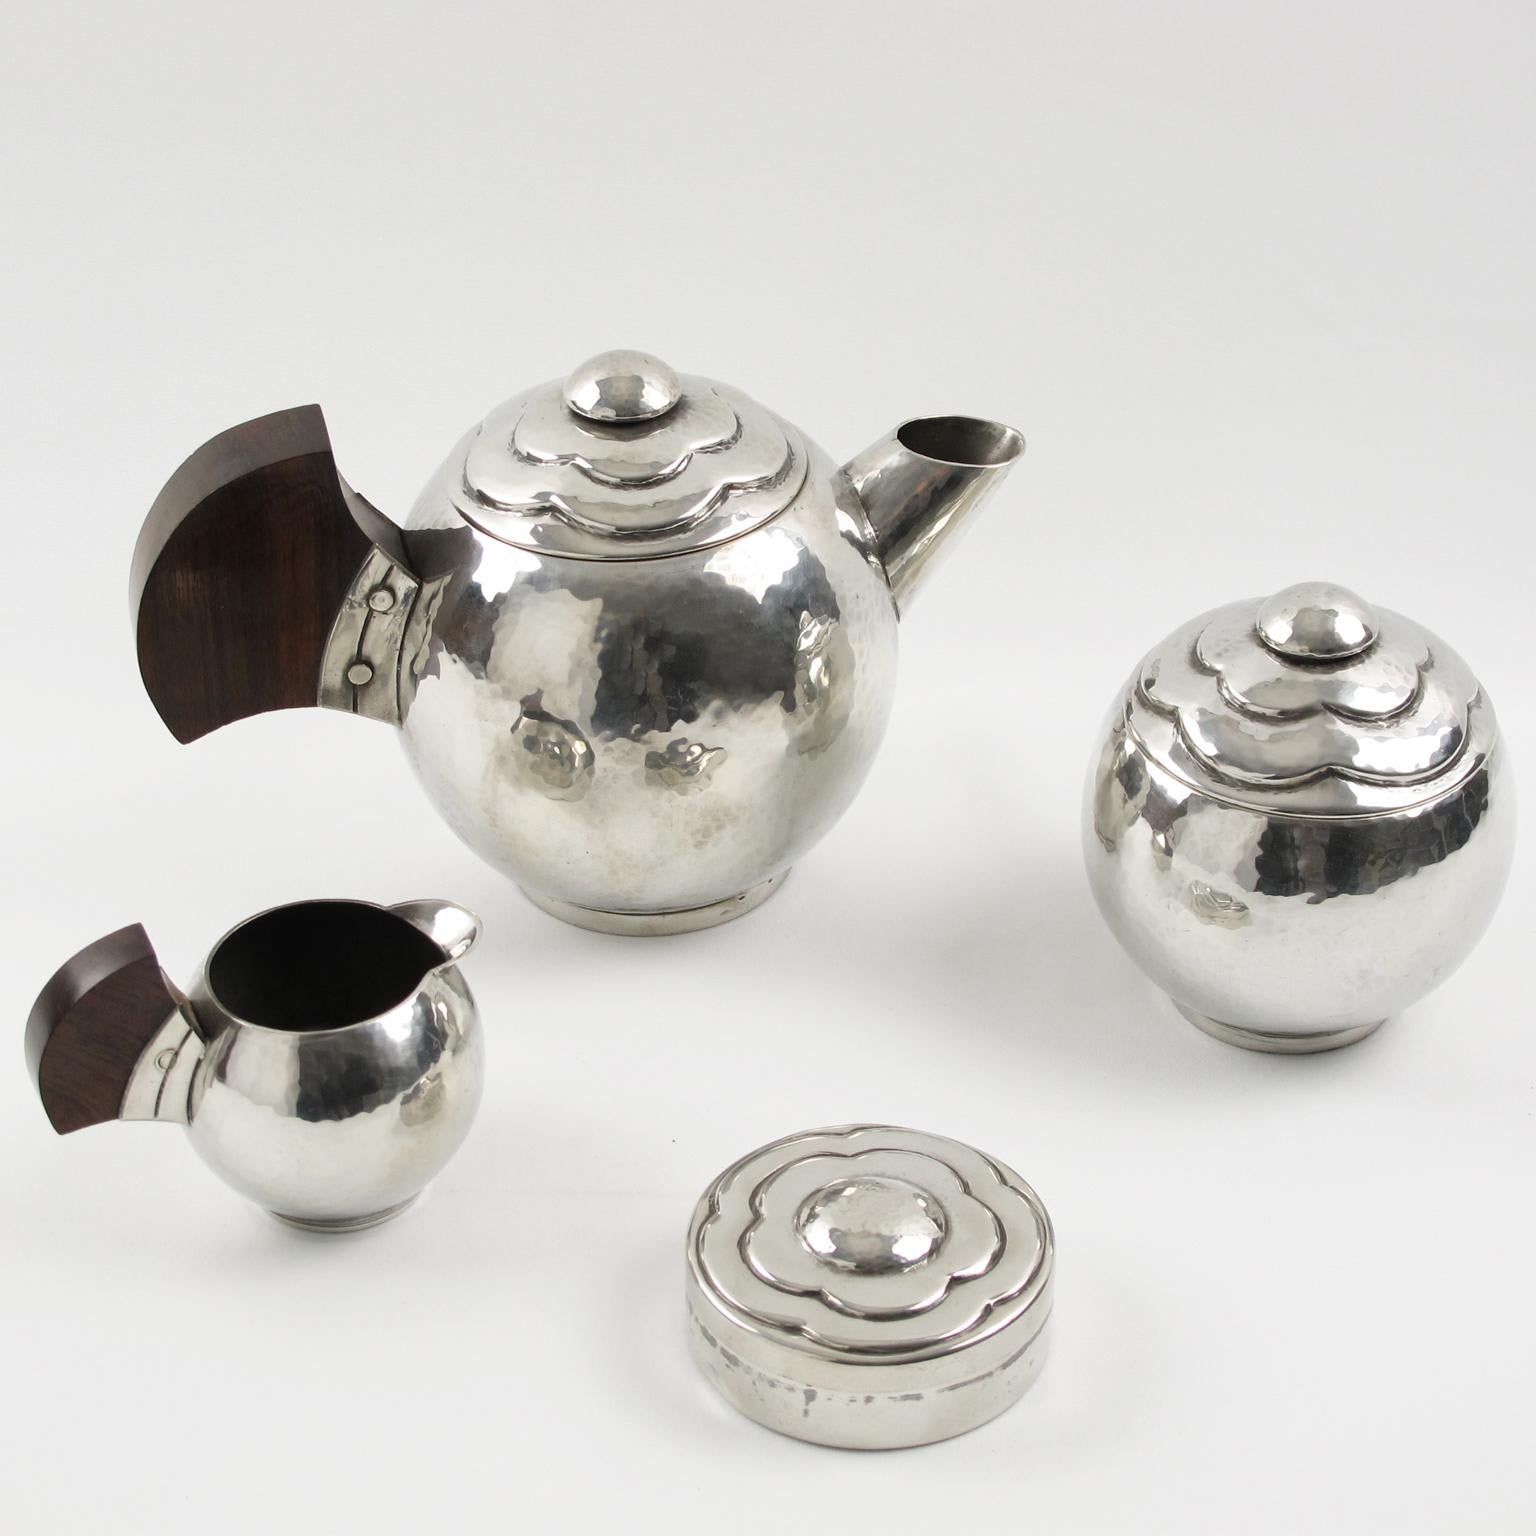 Elegant polished pewter tea or coffee set of 4 pieces by Pierre-Lucien DuMont, France. Set is build with coffee or teapot, sugar pot with lid, creamer and round box. Modernist rounded shape with slight hammered pattern and embossed stylized flower